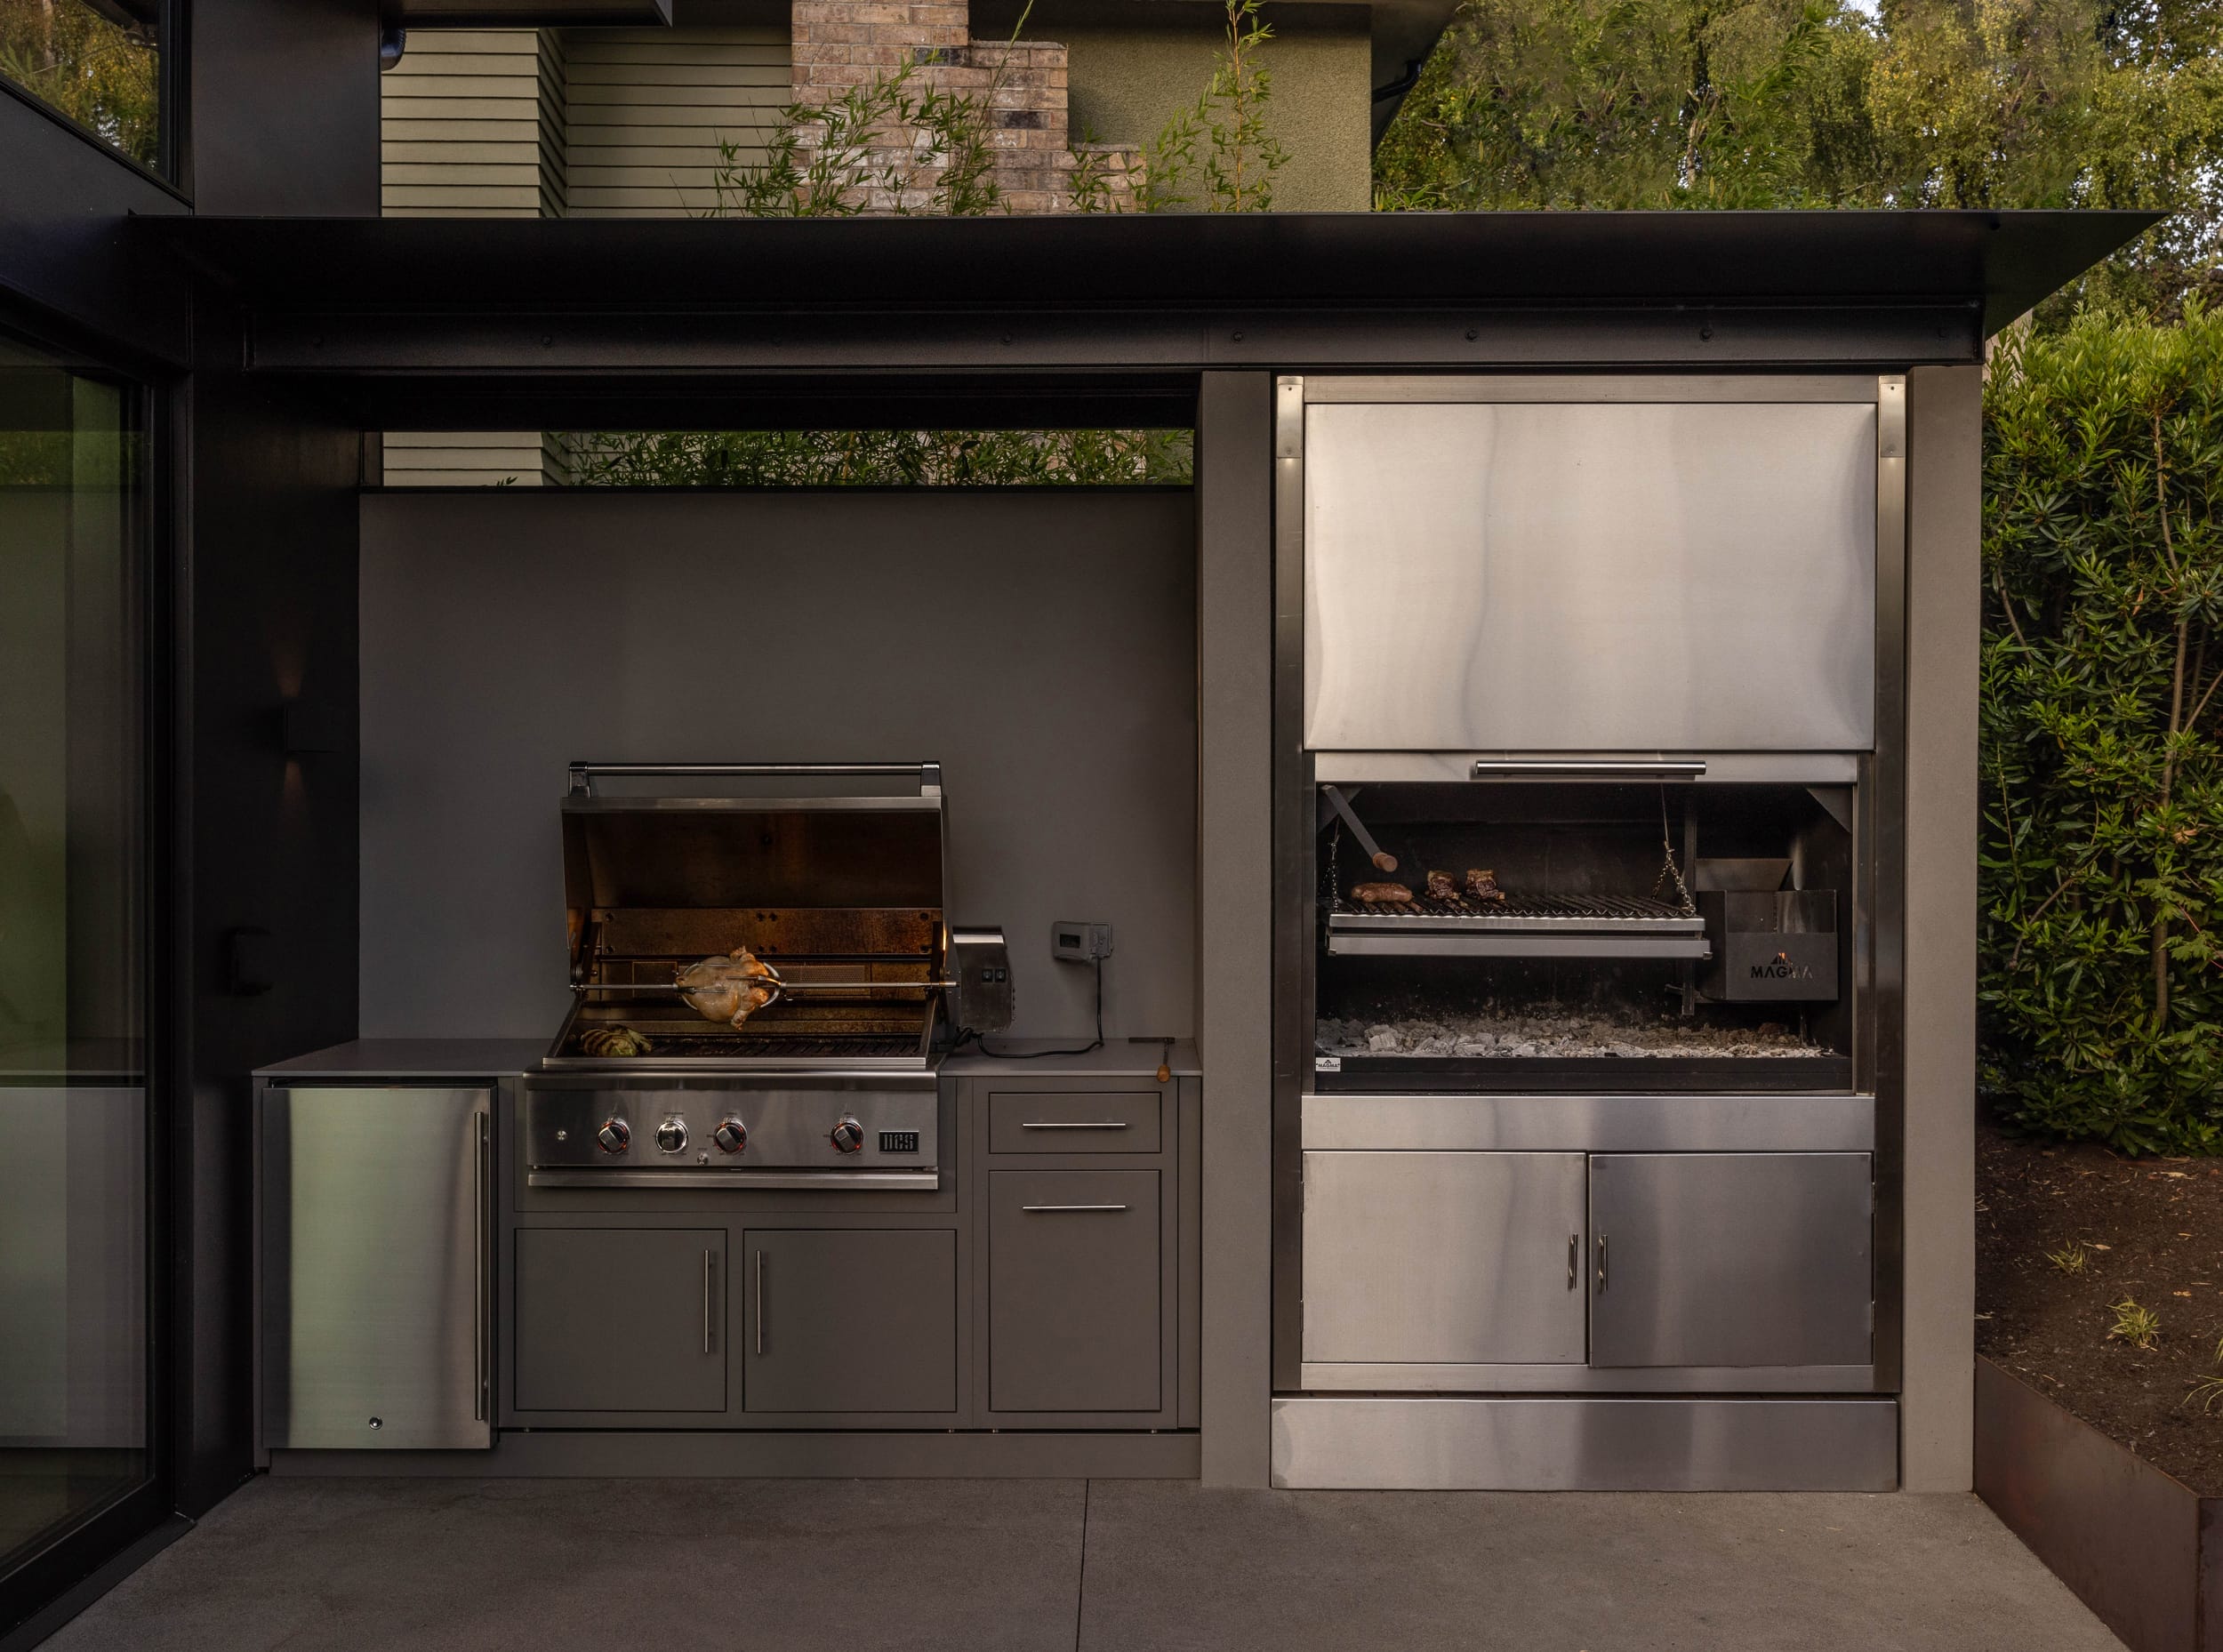 A modern outdoor kitchen with stainless steel appliances.